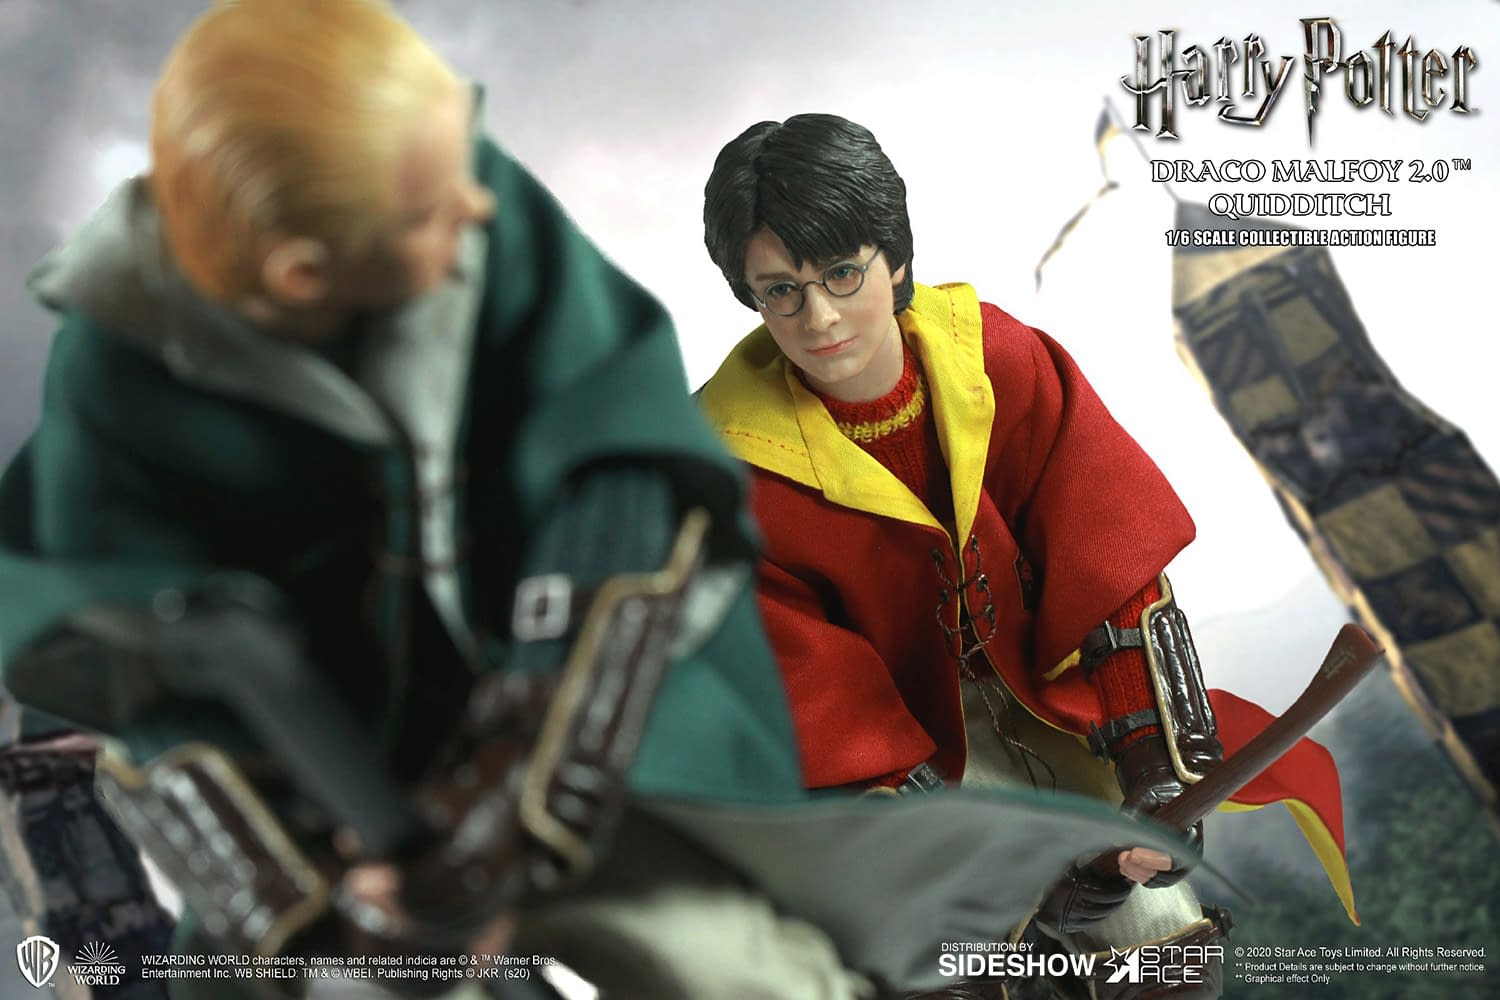 harry-potter-draco-malfoy-20-quidditch-twin-pack_harry-potter_gallery_5e83b218068fe